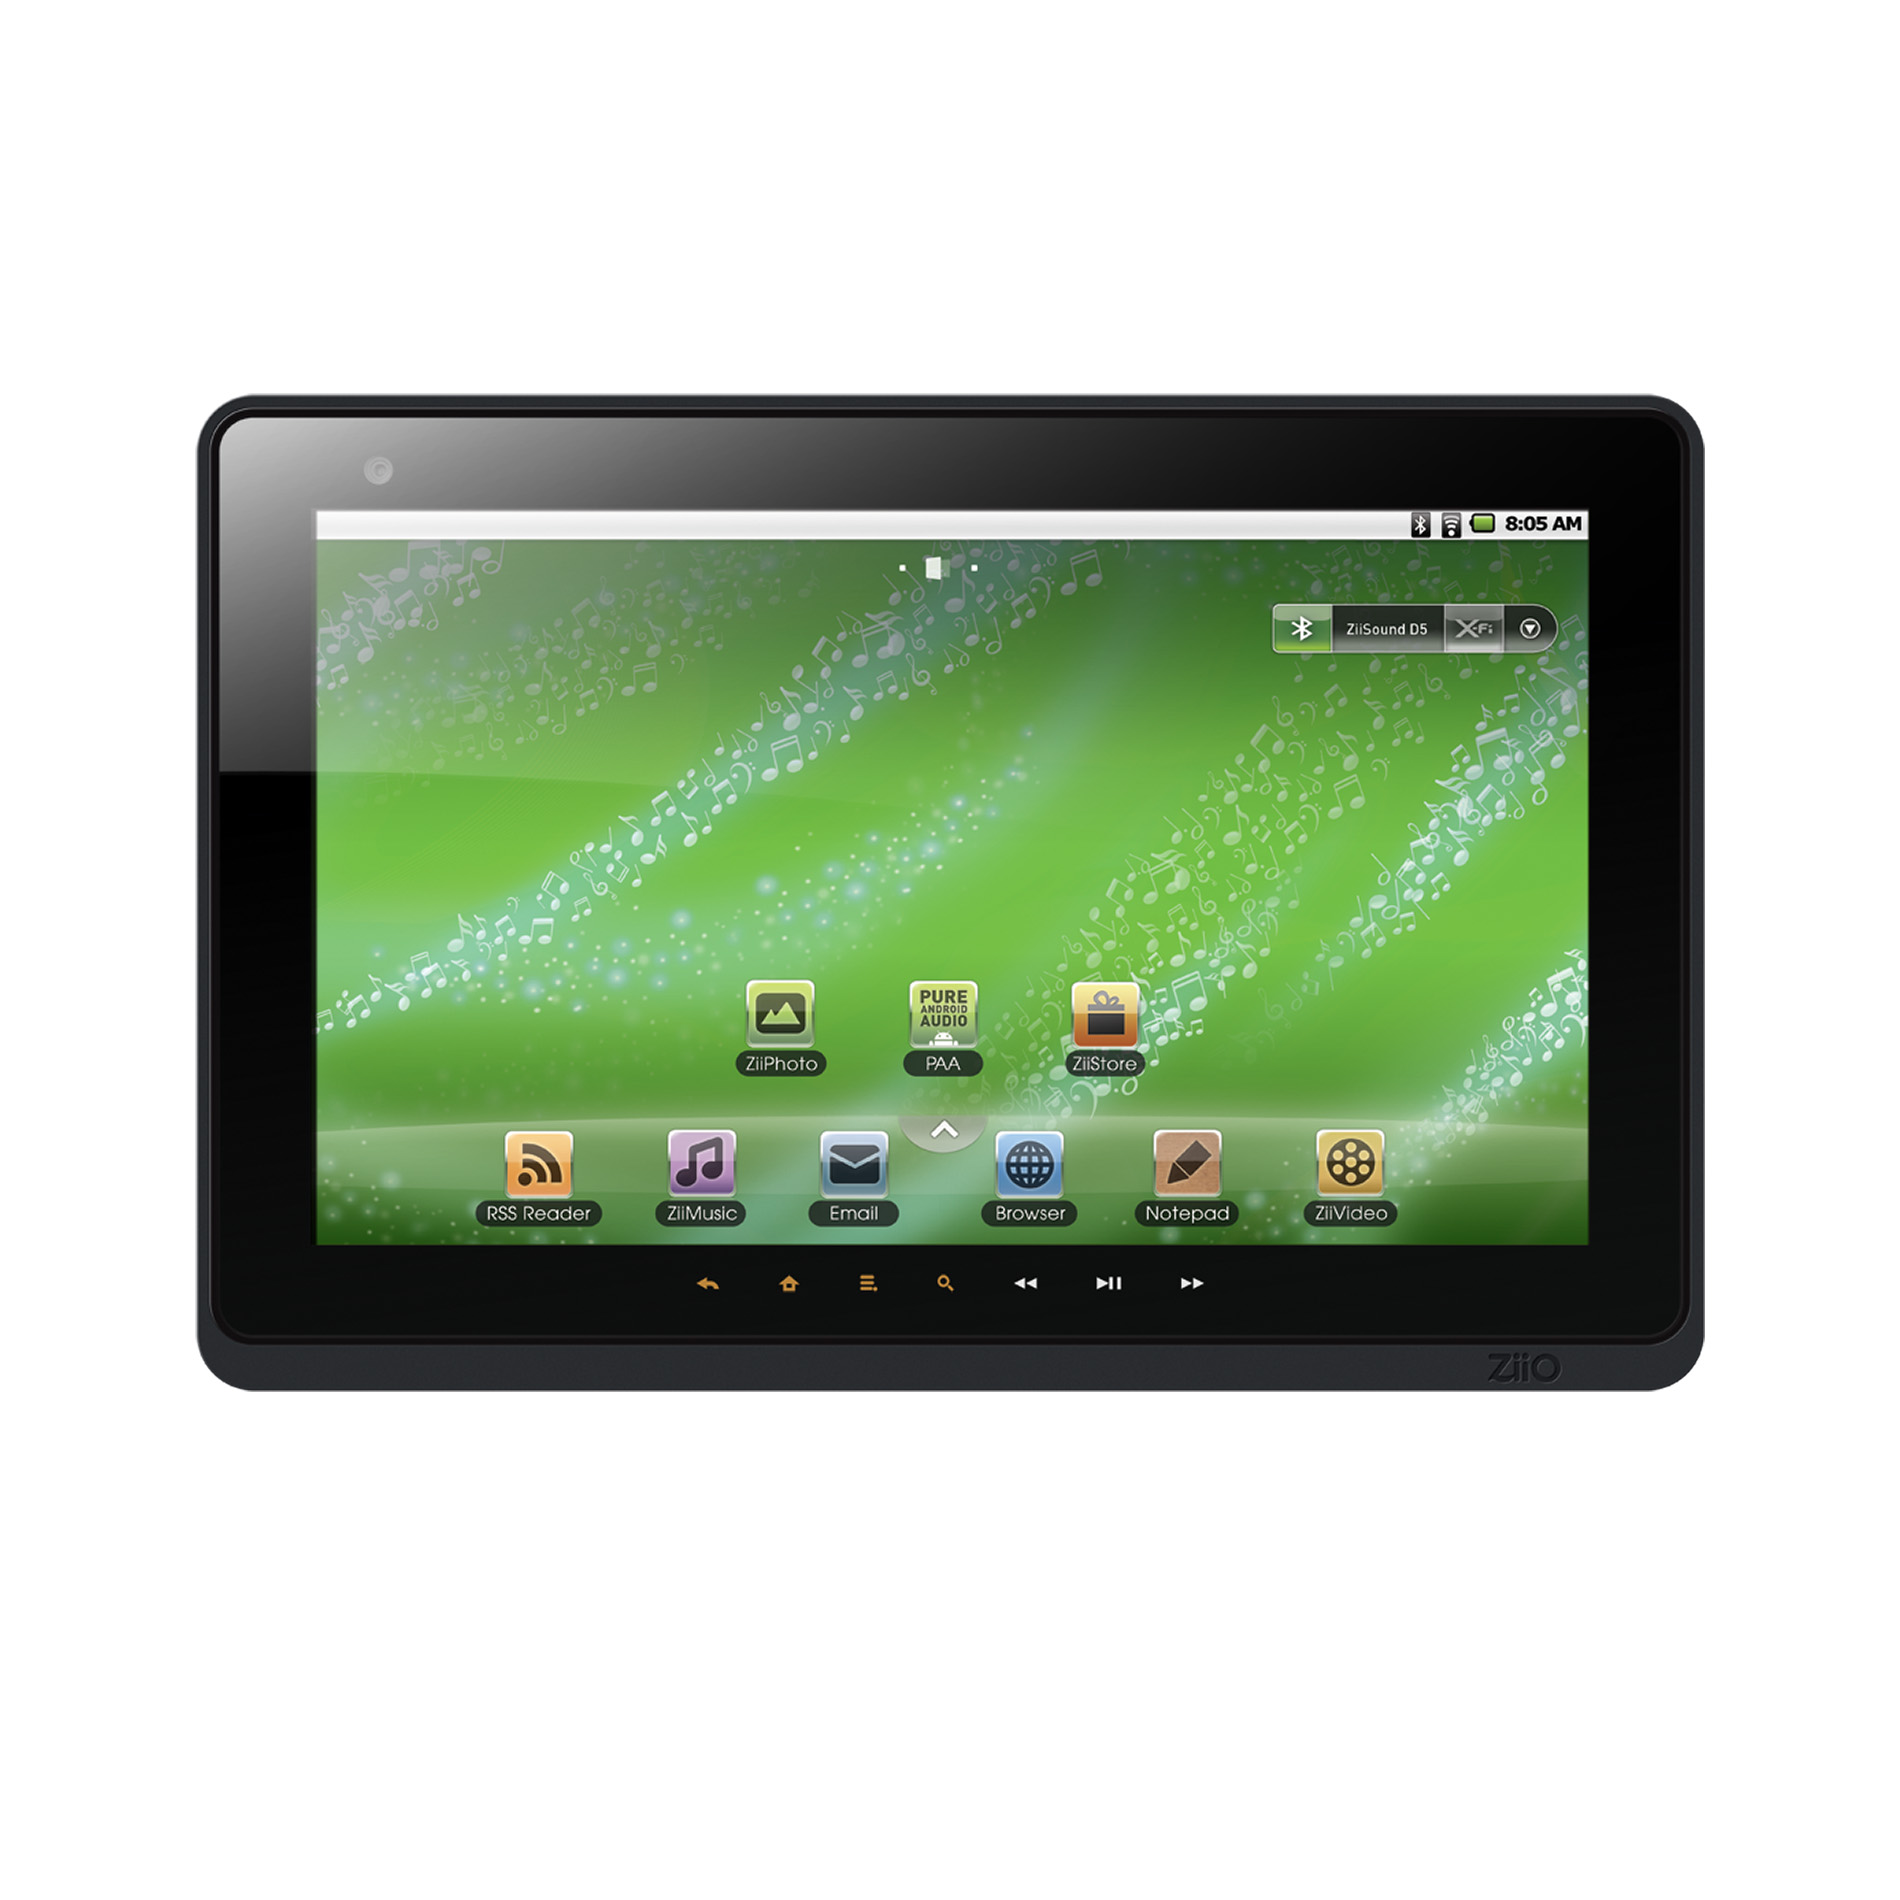 The Creative Ziio Android Tablet Is Second From